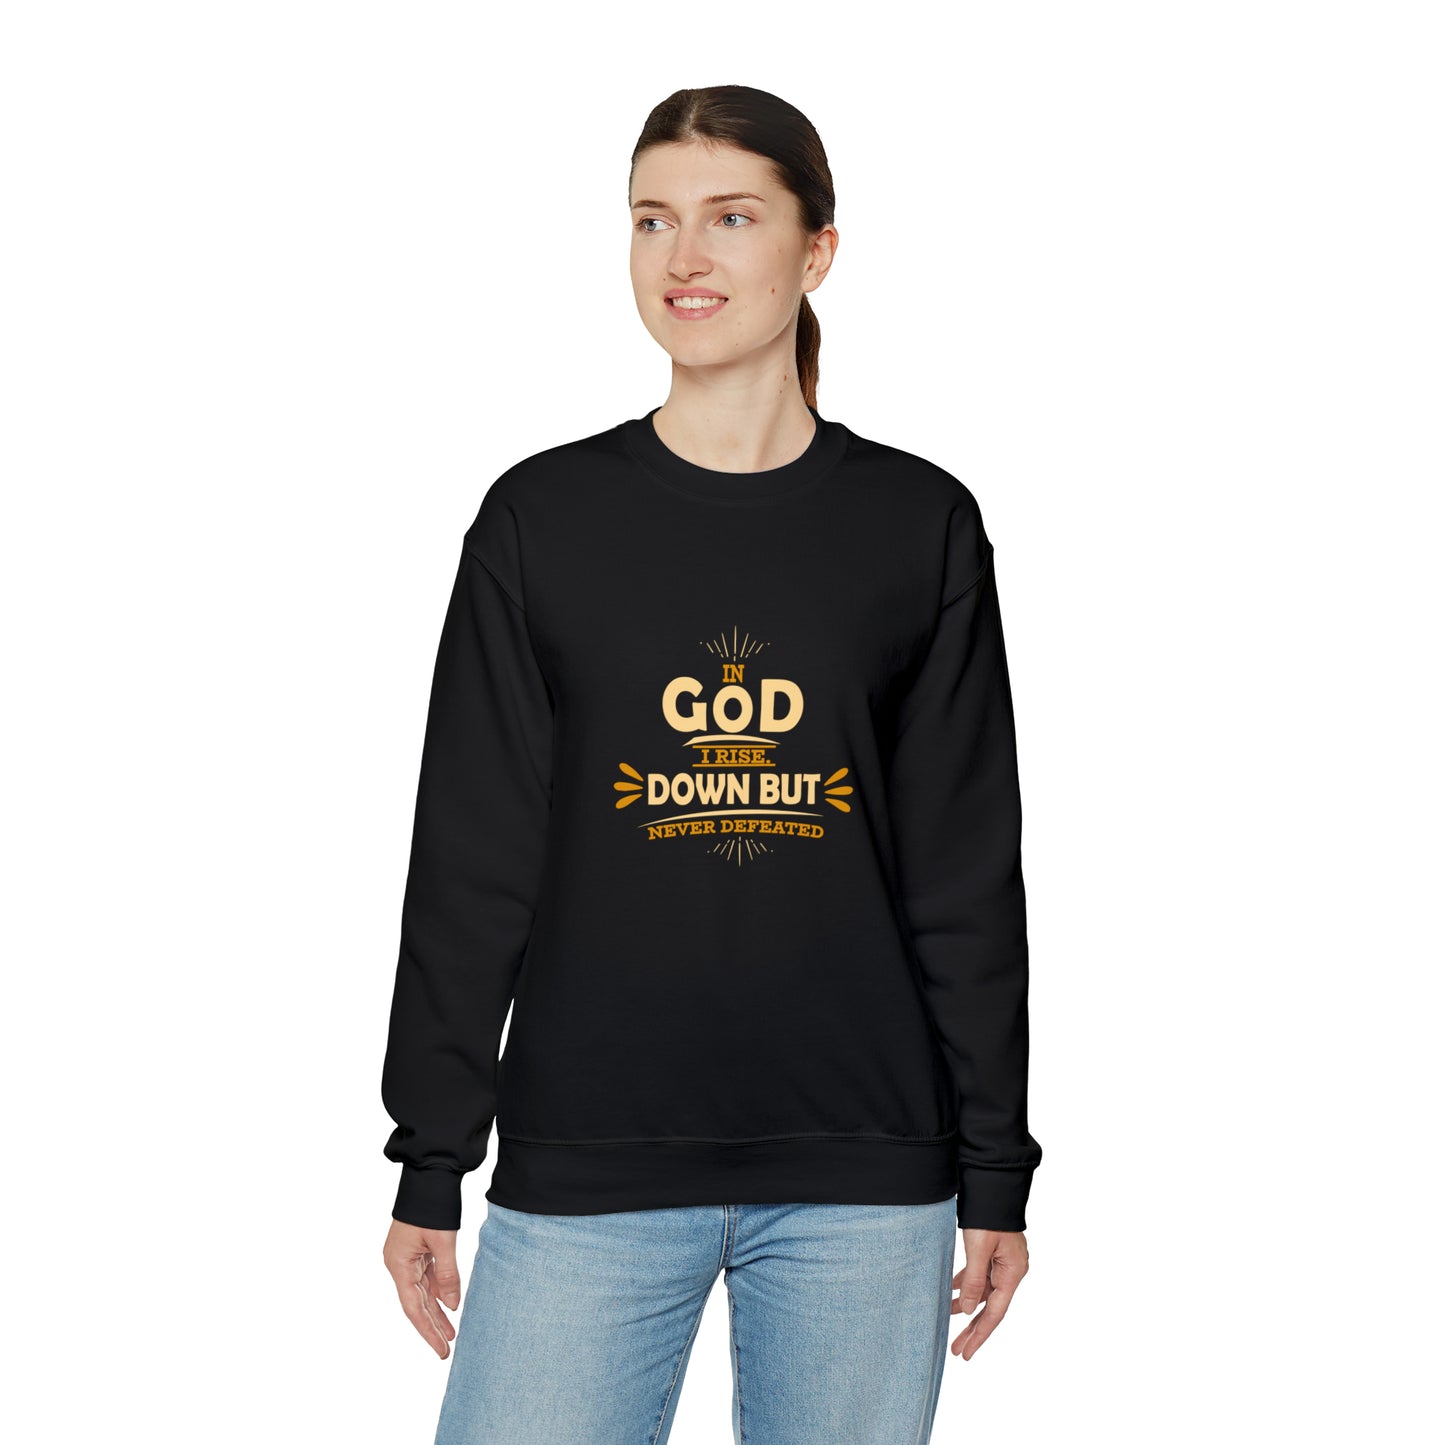 In God I Rise Down But Never Defeated Unisex Heavy Blend™ Crewneck Sweatshirt